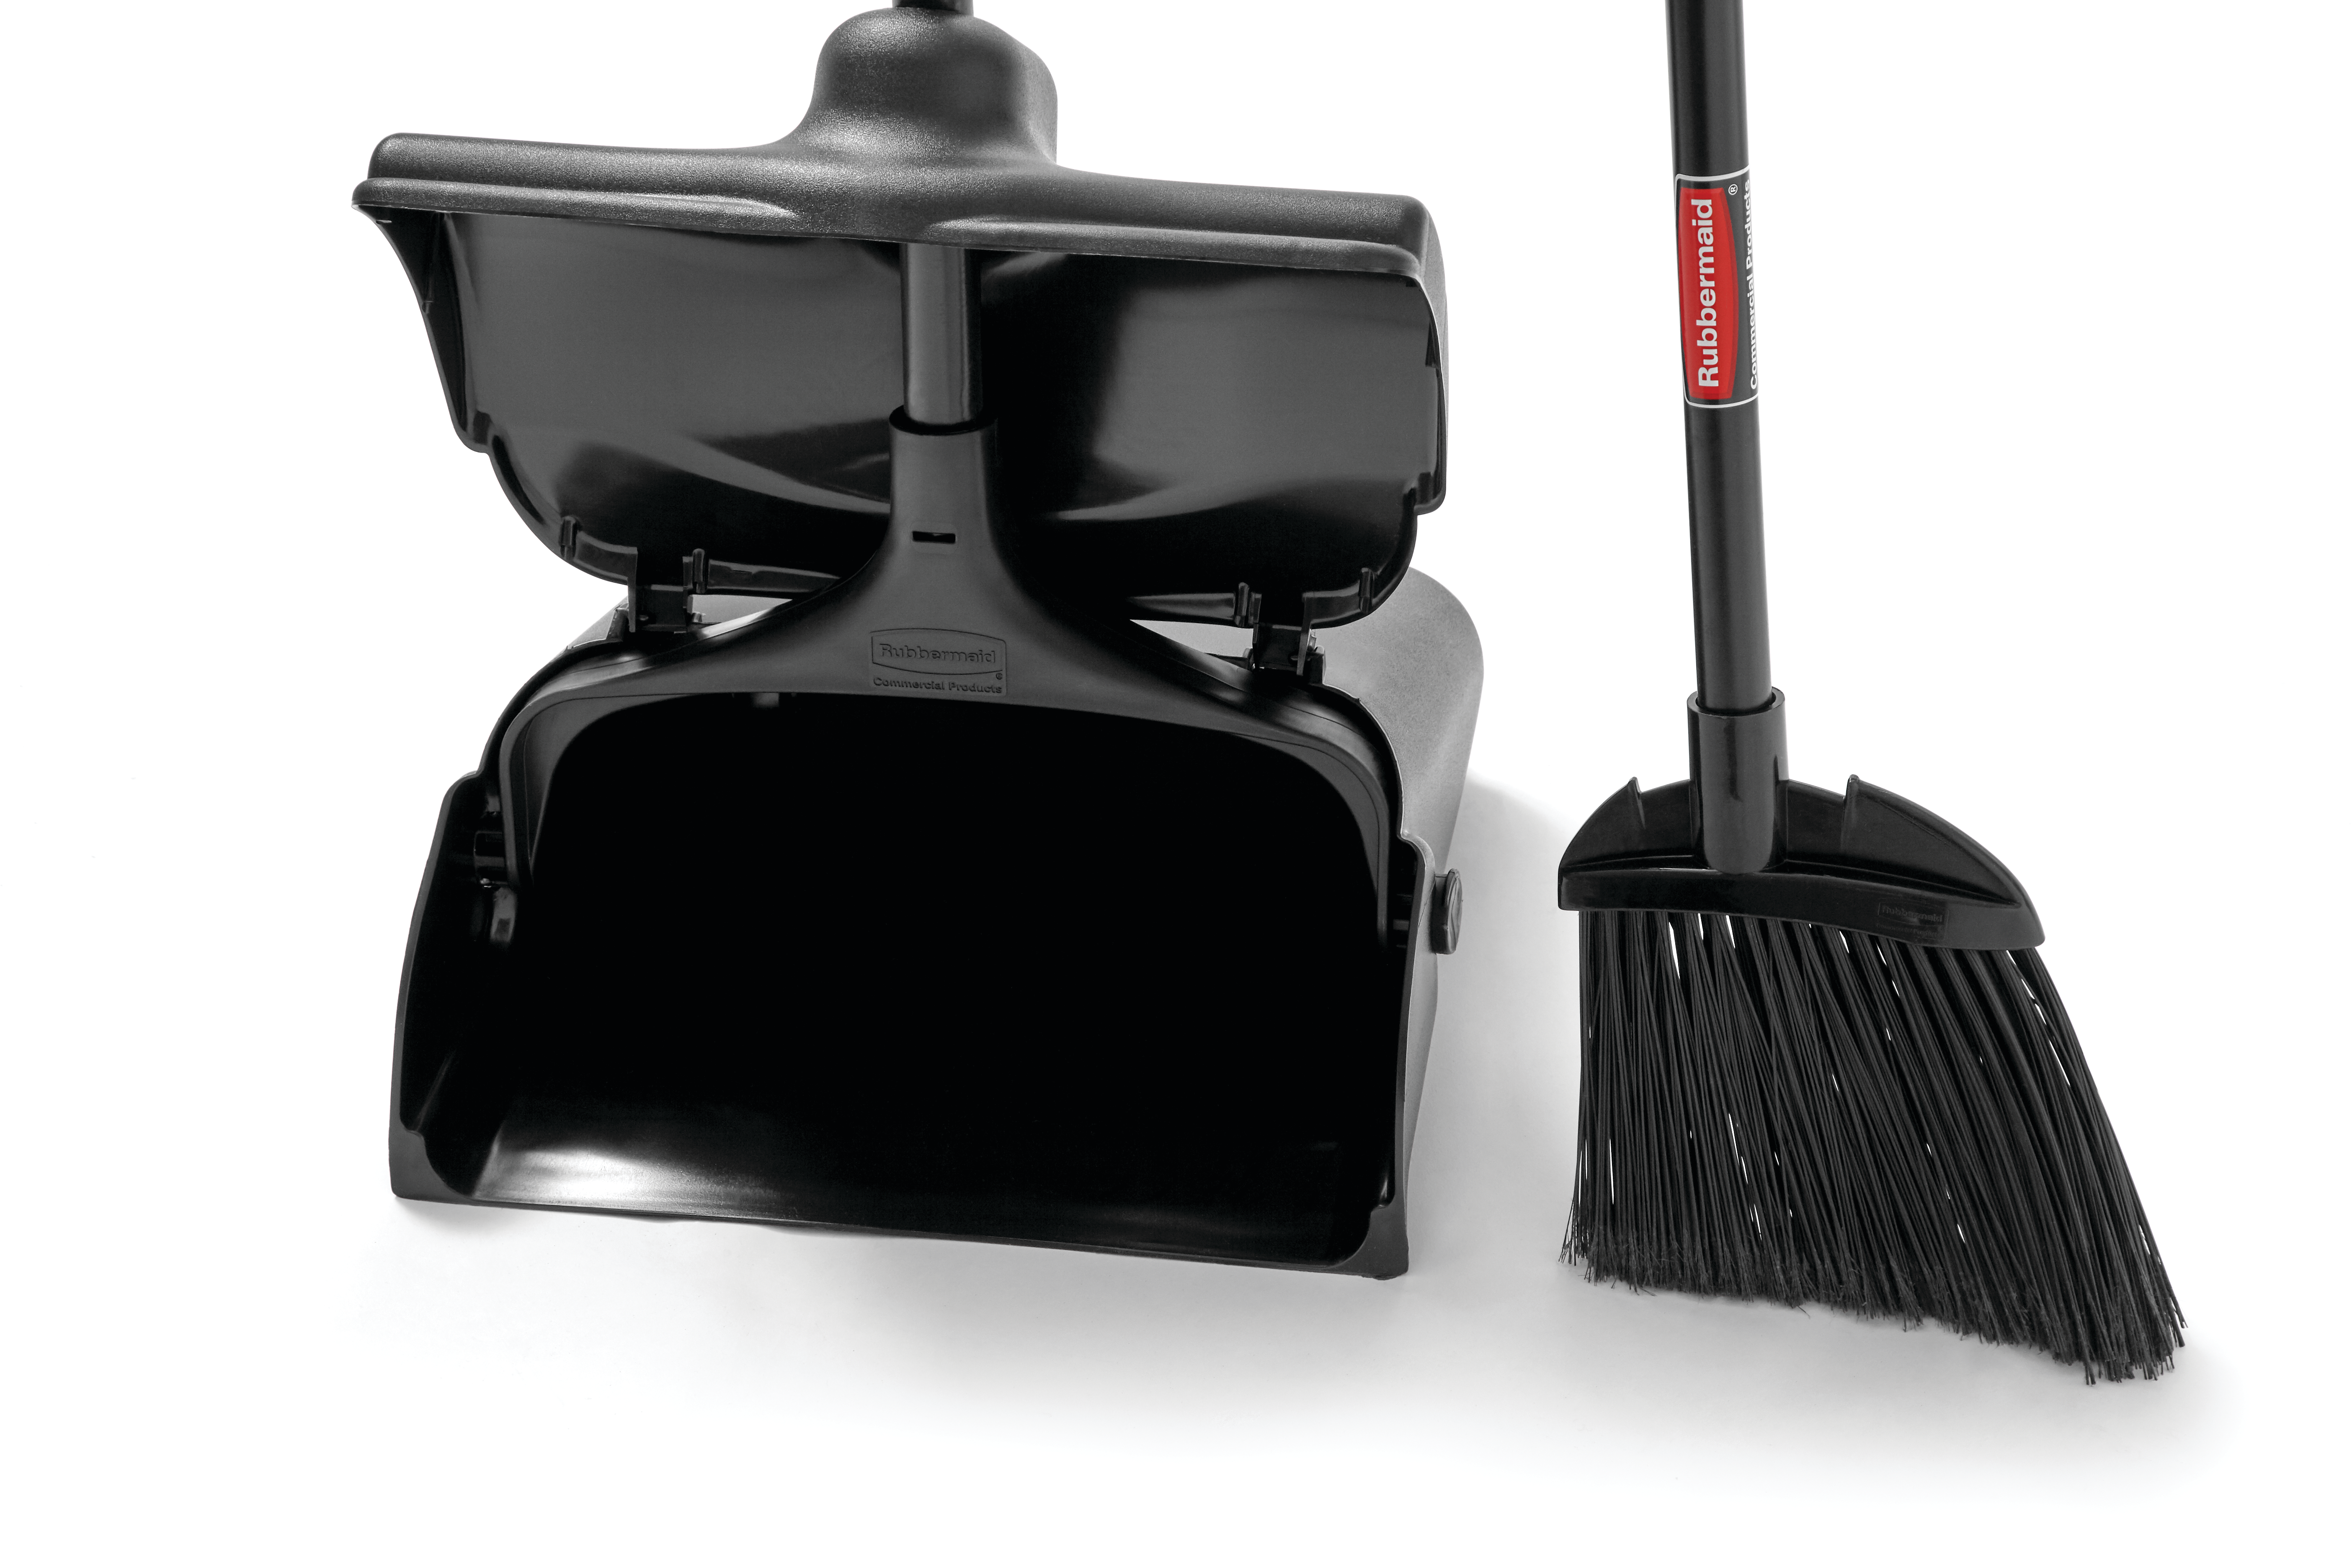 Rubbermaid Commercial Executive Series Lobby Broom